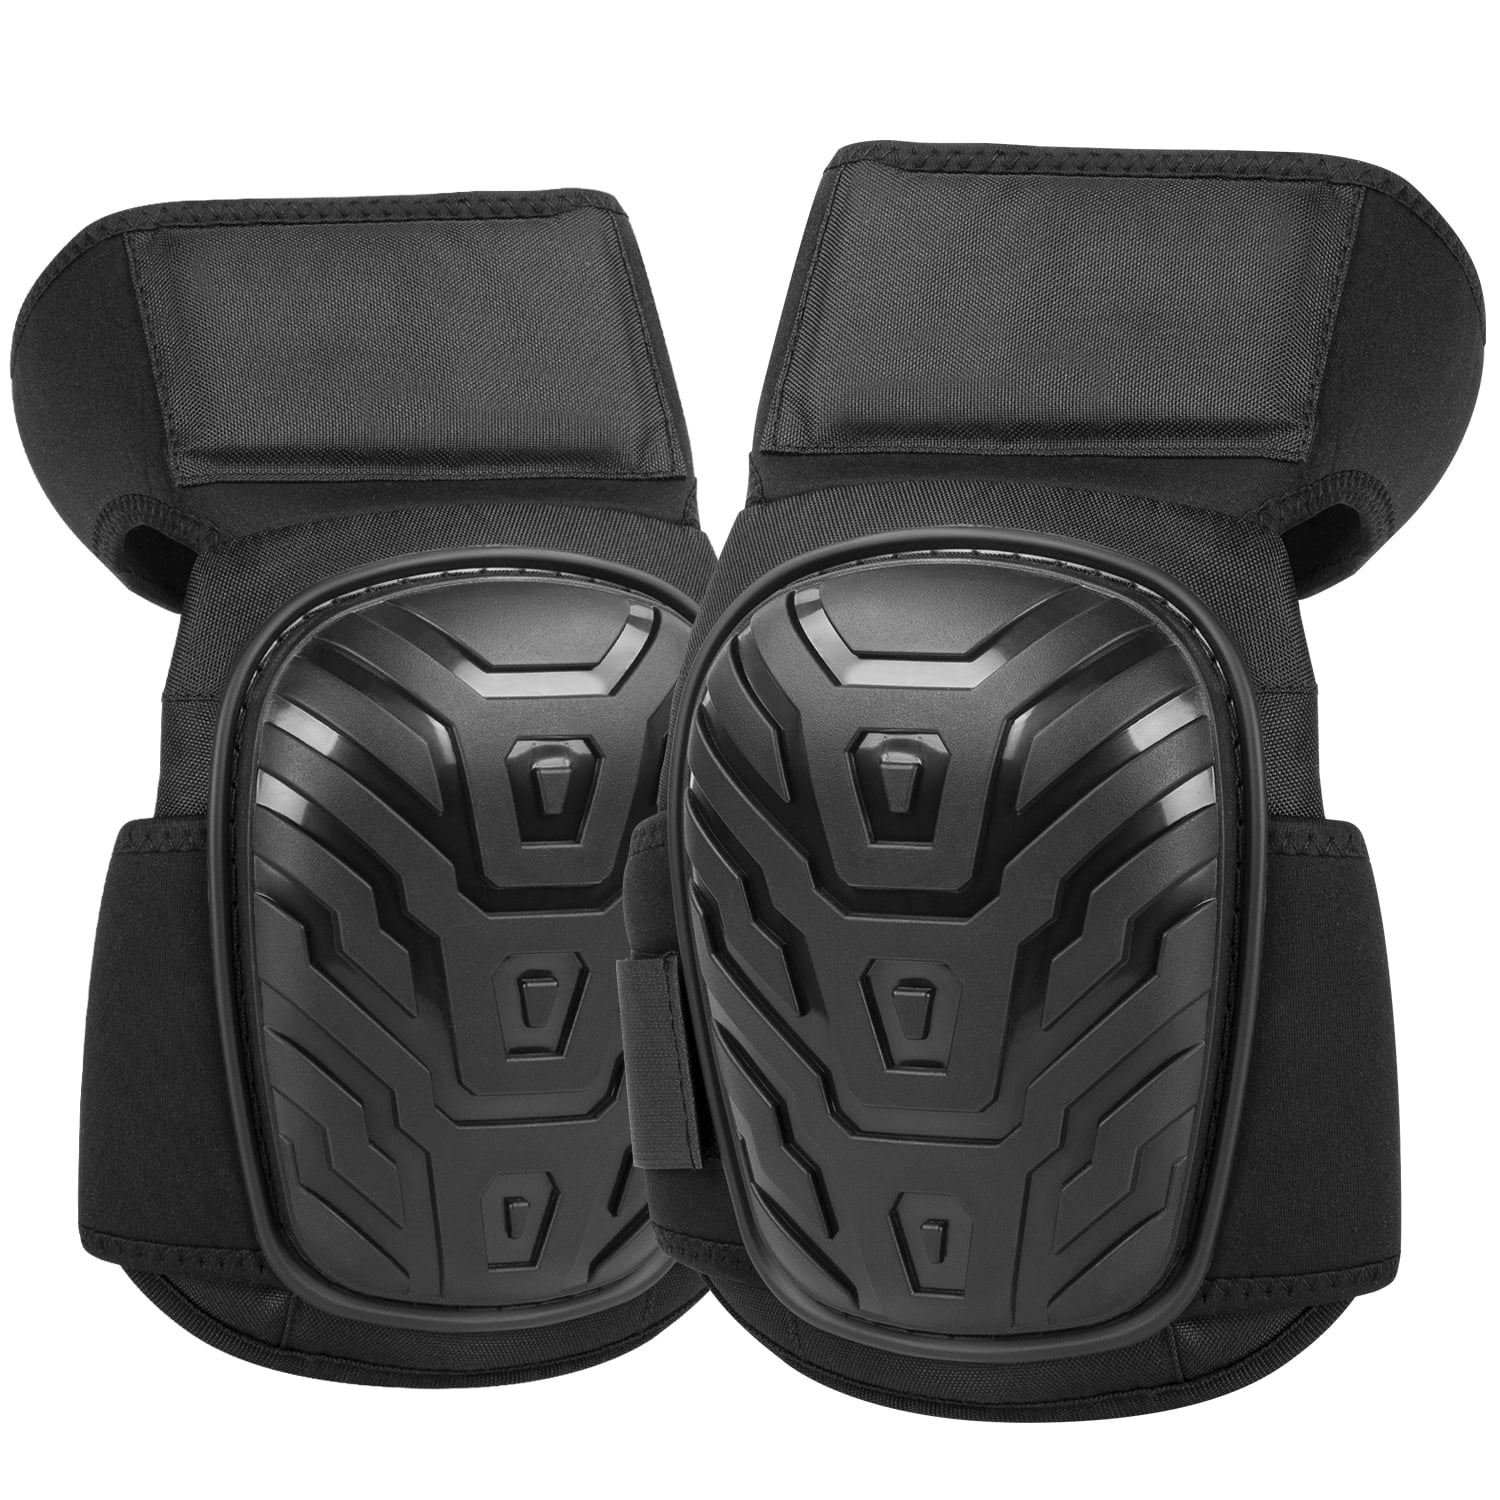 1 Pair Construction Knee Pads for Men/Women, Ankle Support Knee Pads ...